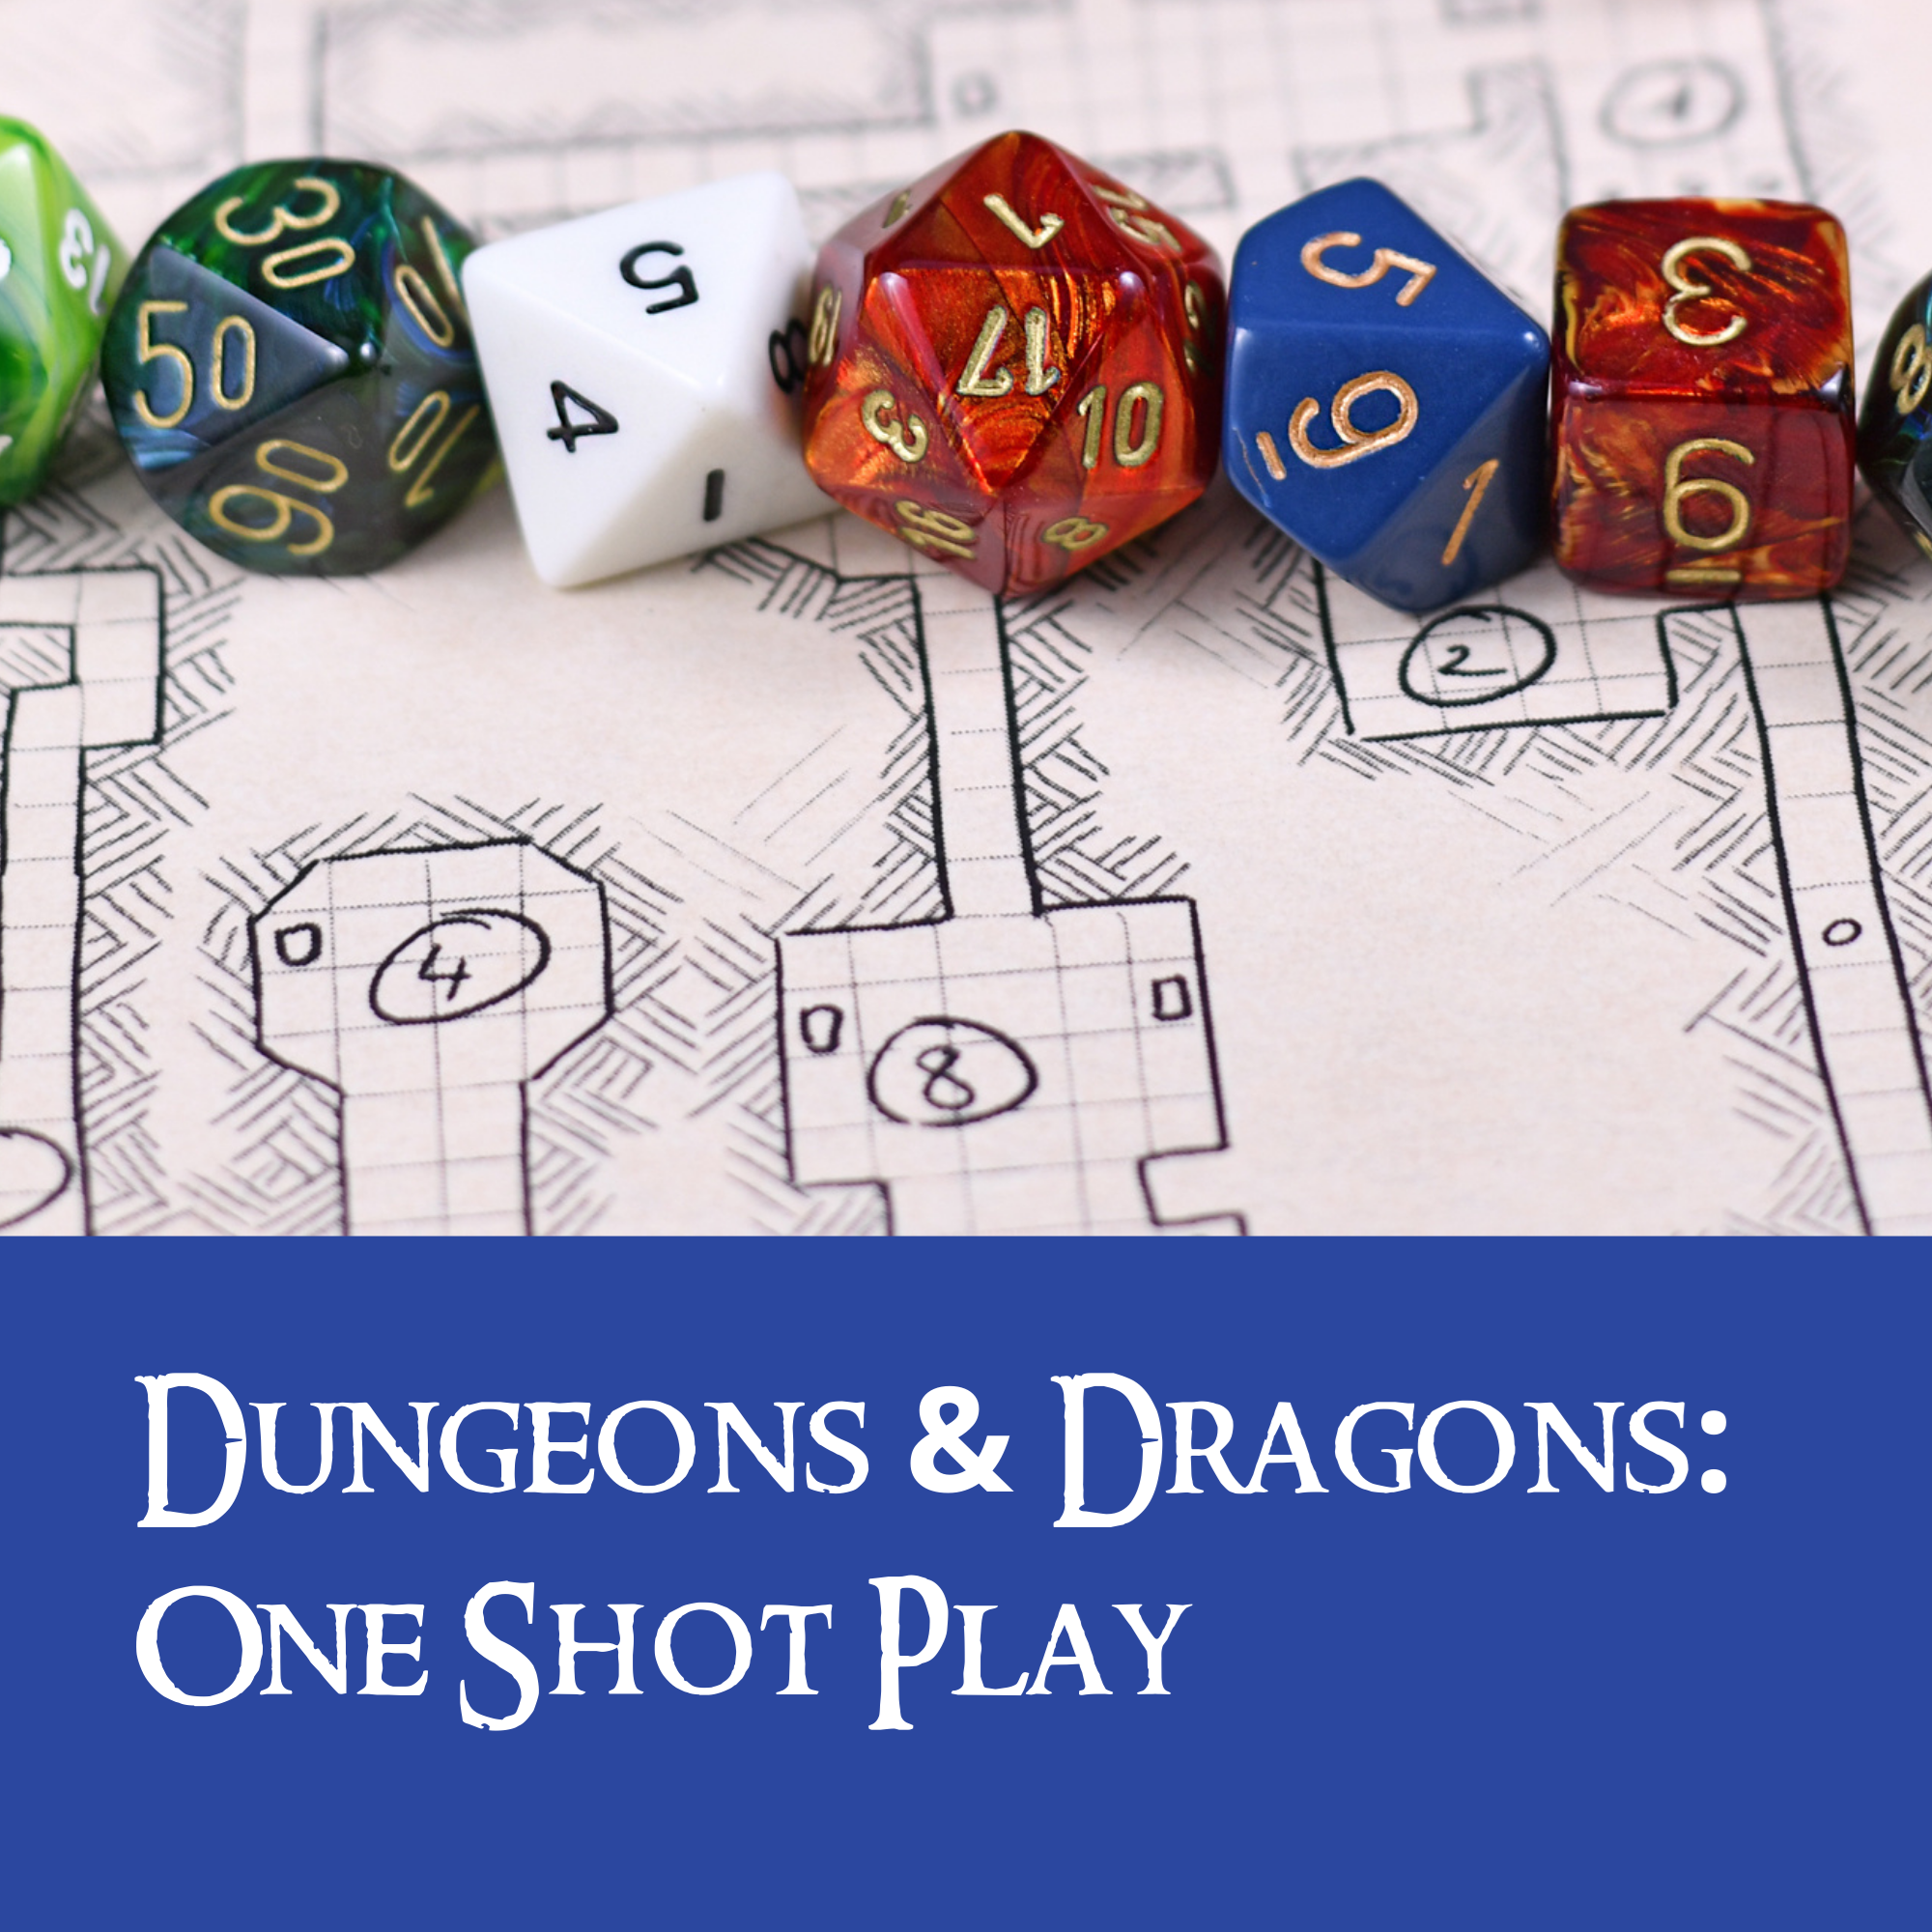 Dungeons & Dragons: One Shot Play